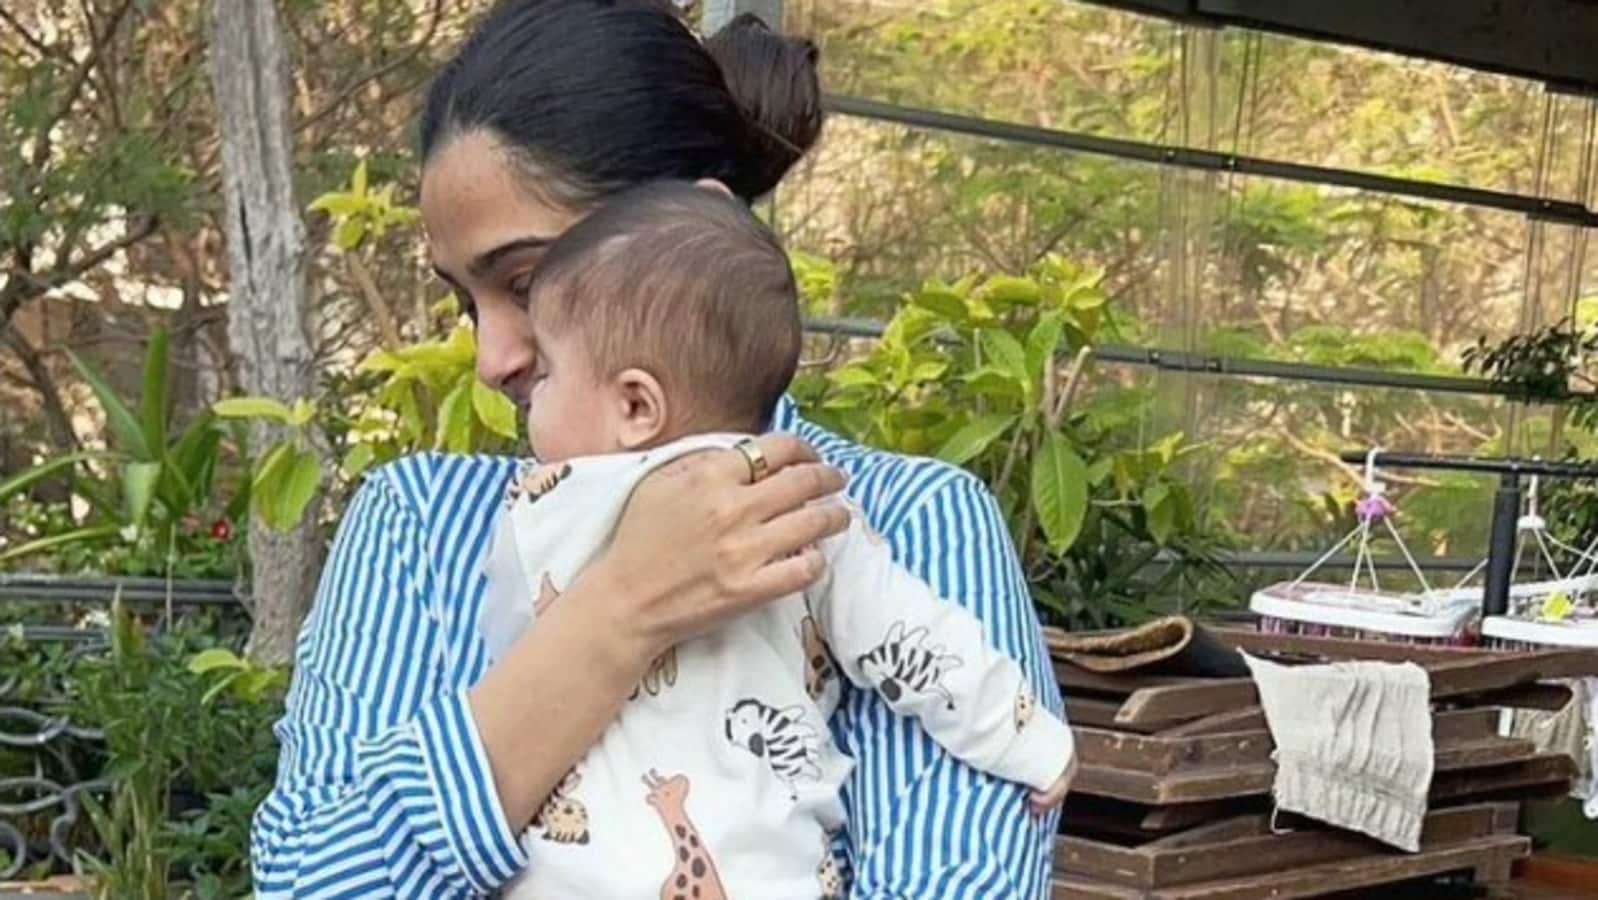 Sonam Kapoor holds son Vayu close in new photo shared by Anand Ahuja, partially reveals his face